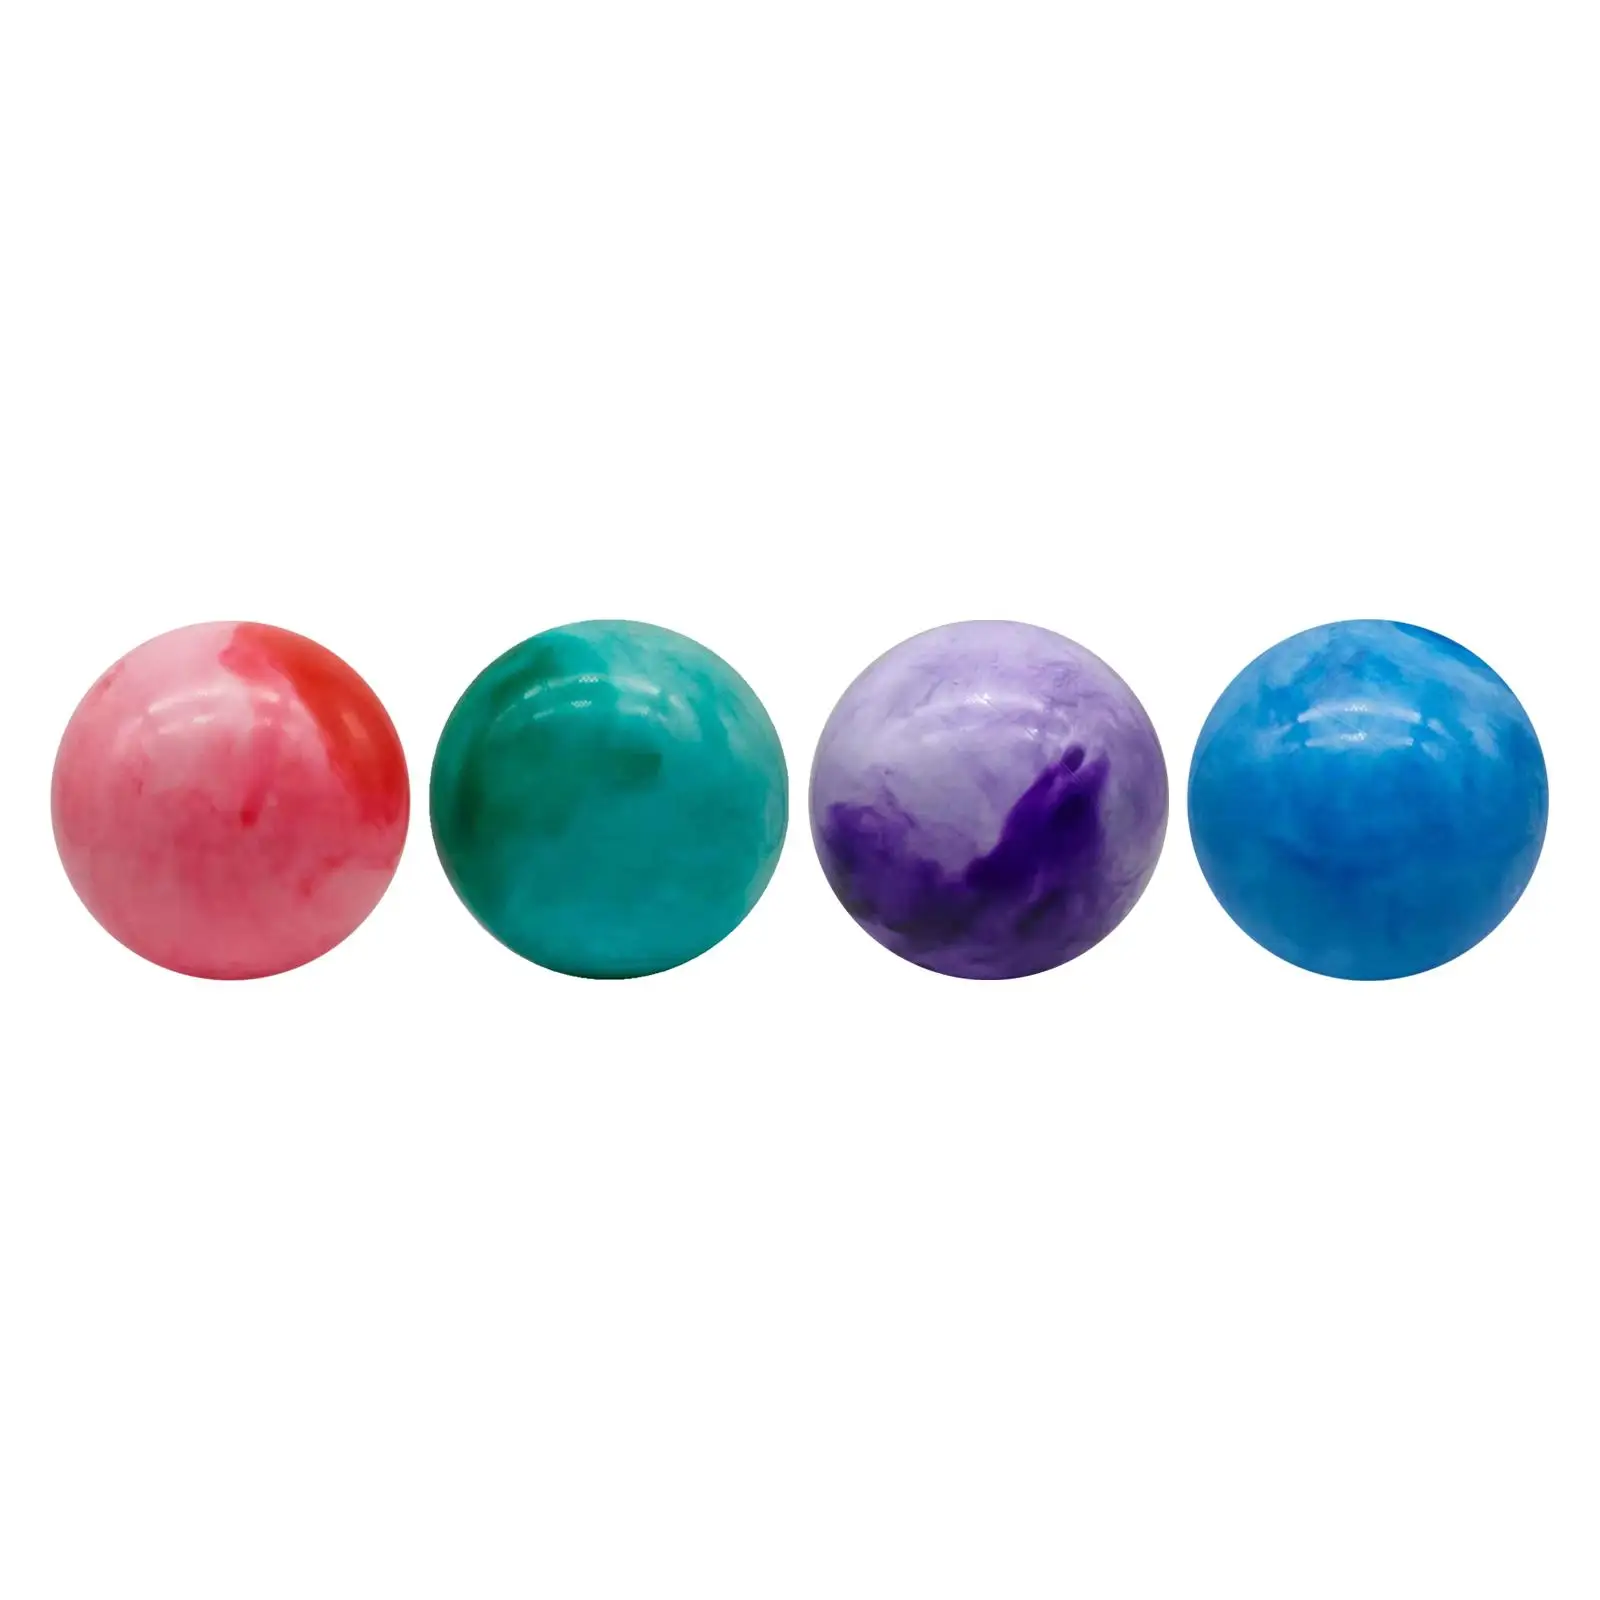 

Exercise Balls Women Men Durable Pilates Ball Mini Barre Ball for Working Out Barre Stretching Home Practice Core Stability